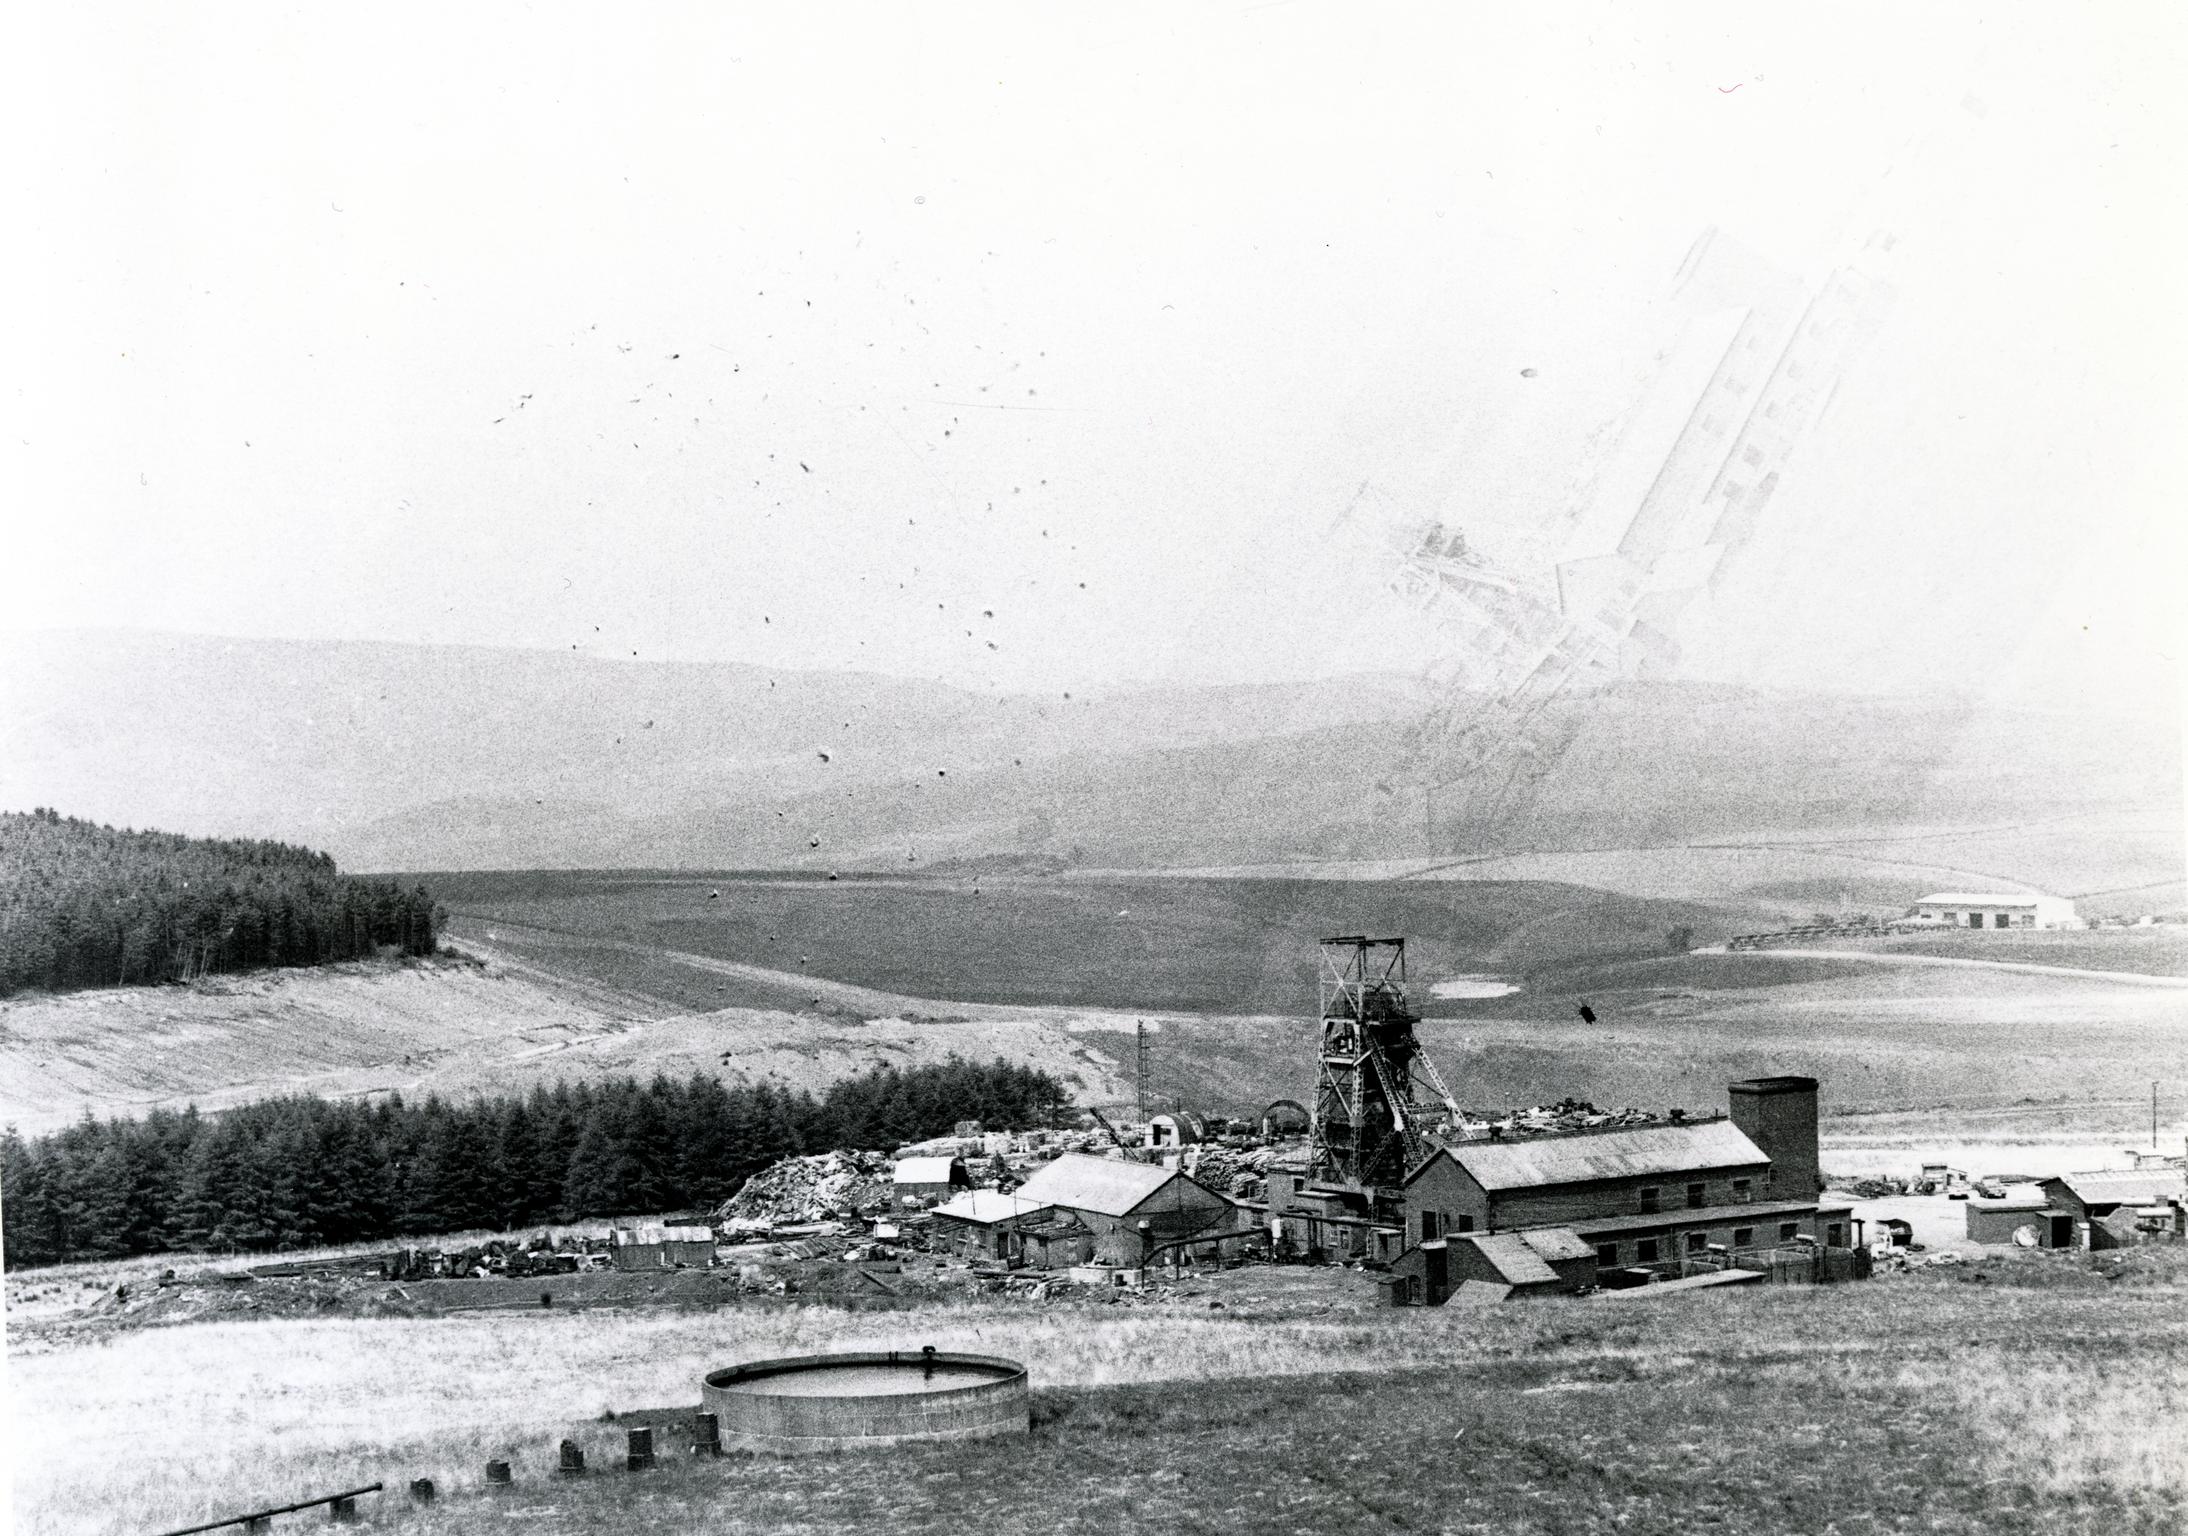 Tower / Fernhill Colliery, photograph